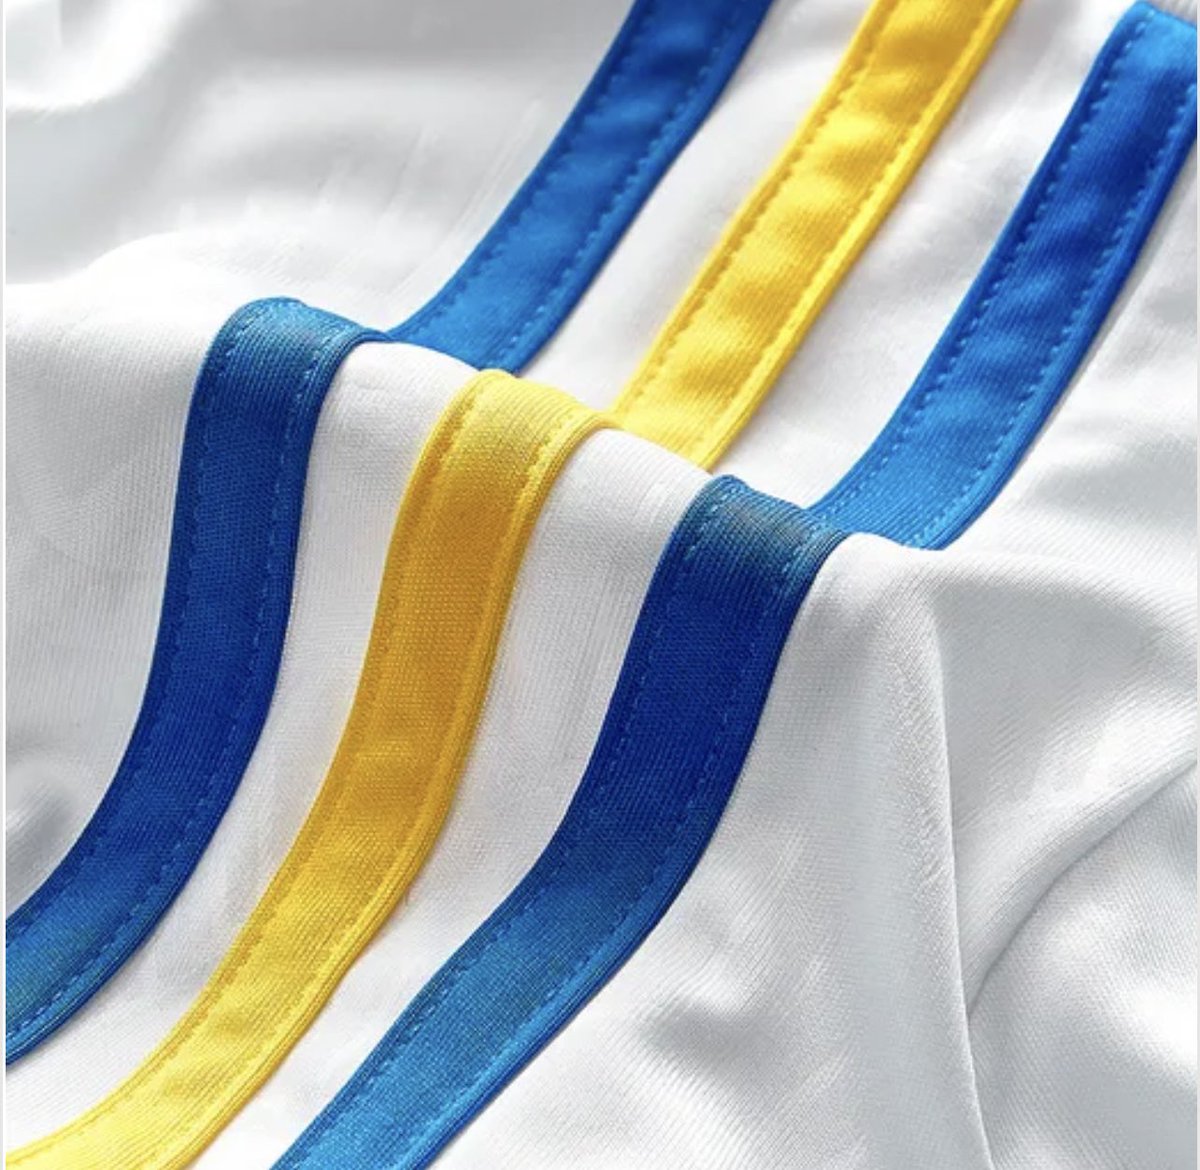 Who wants one of the sexiest home shirts for years - for nowt? We’re giving 1 away to one lucky subscriber All you have to do is; 🔵 Retweet this tweet ⚪️ Subscribe to us on YouTube using link below 🟡 Comment “done” below this tweet youtube.com/@ortaknowbetter #LUFC #mot #alaw